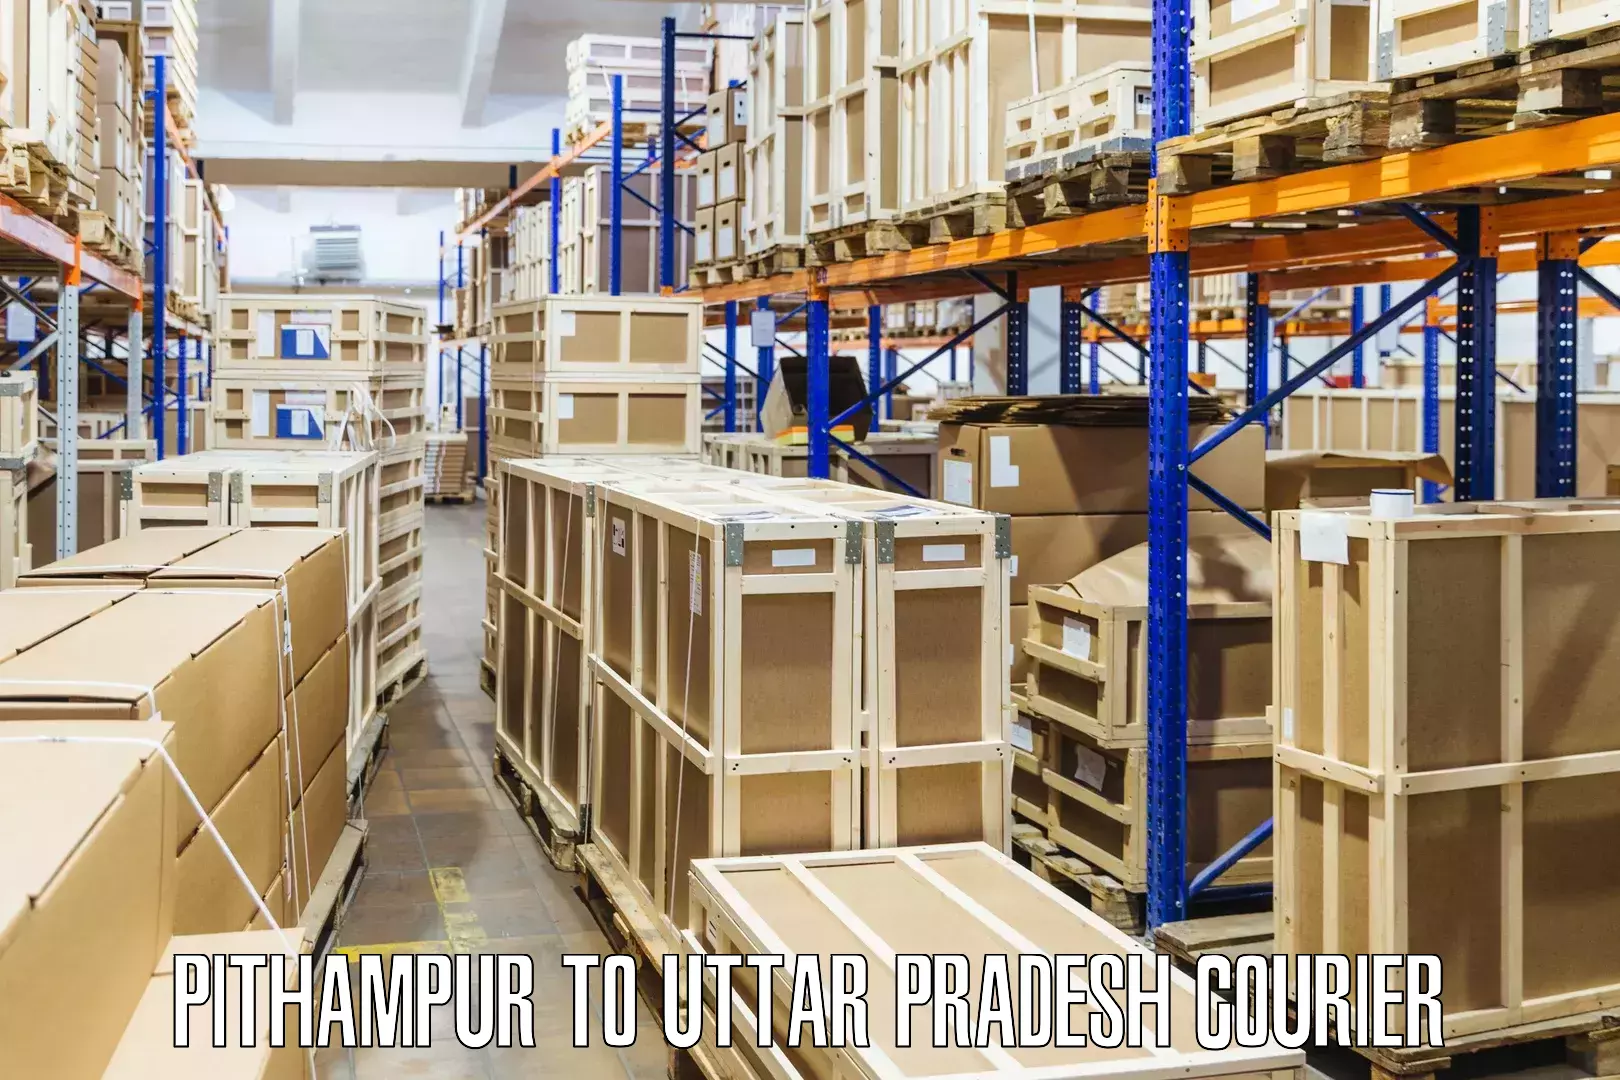 Efficient order fulfillment in Pithampur to Amethi